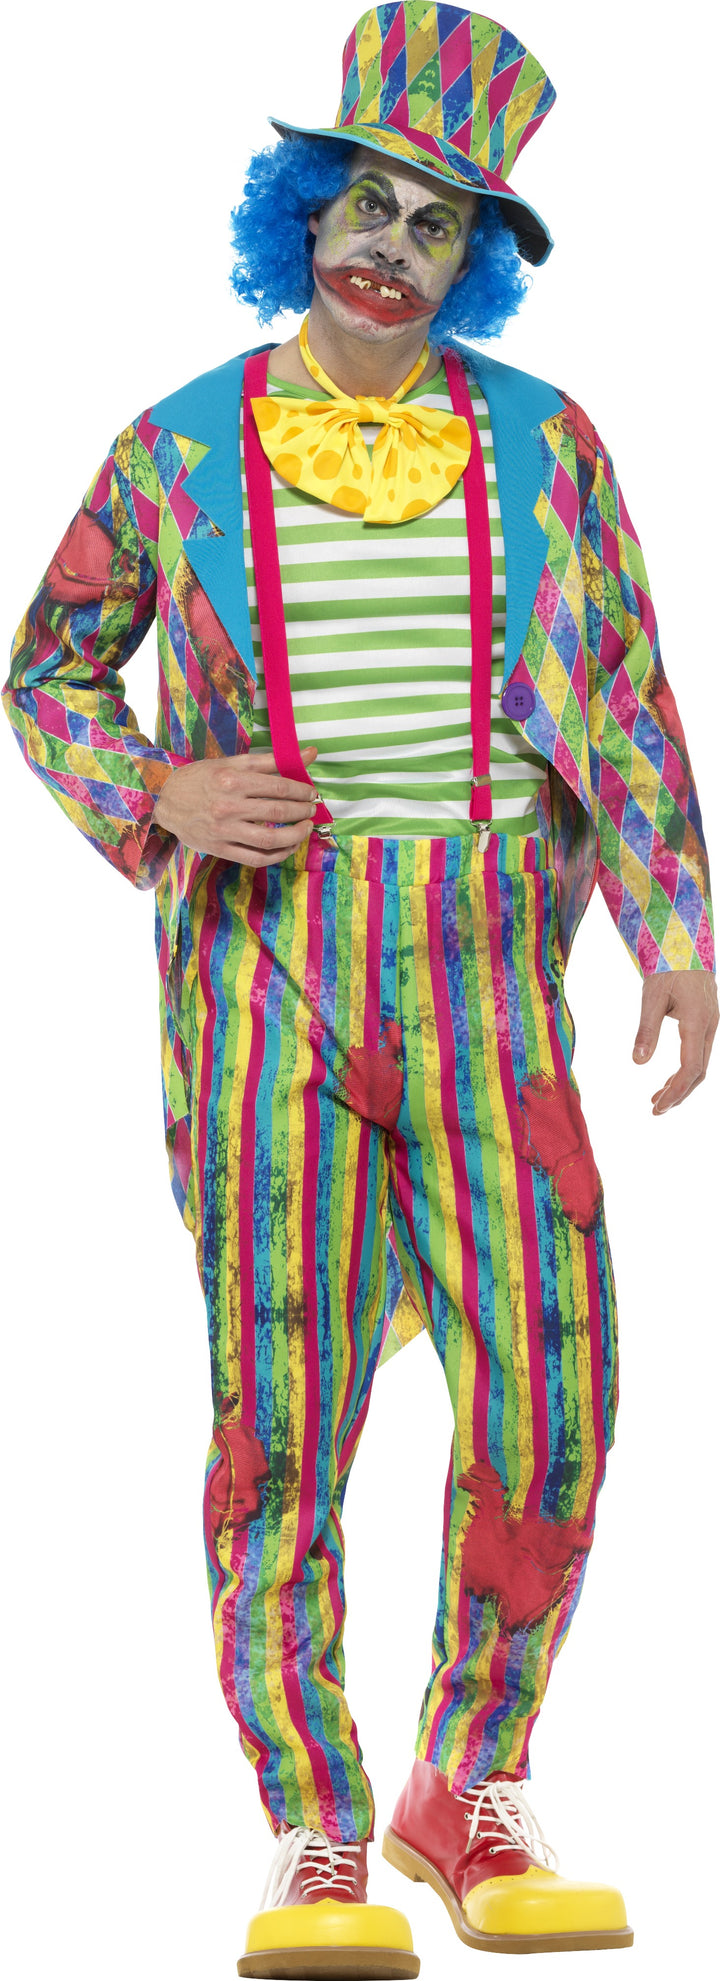 Deluxe Men's Whimsical Patchwork Clown Costume